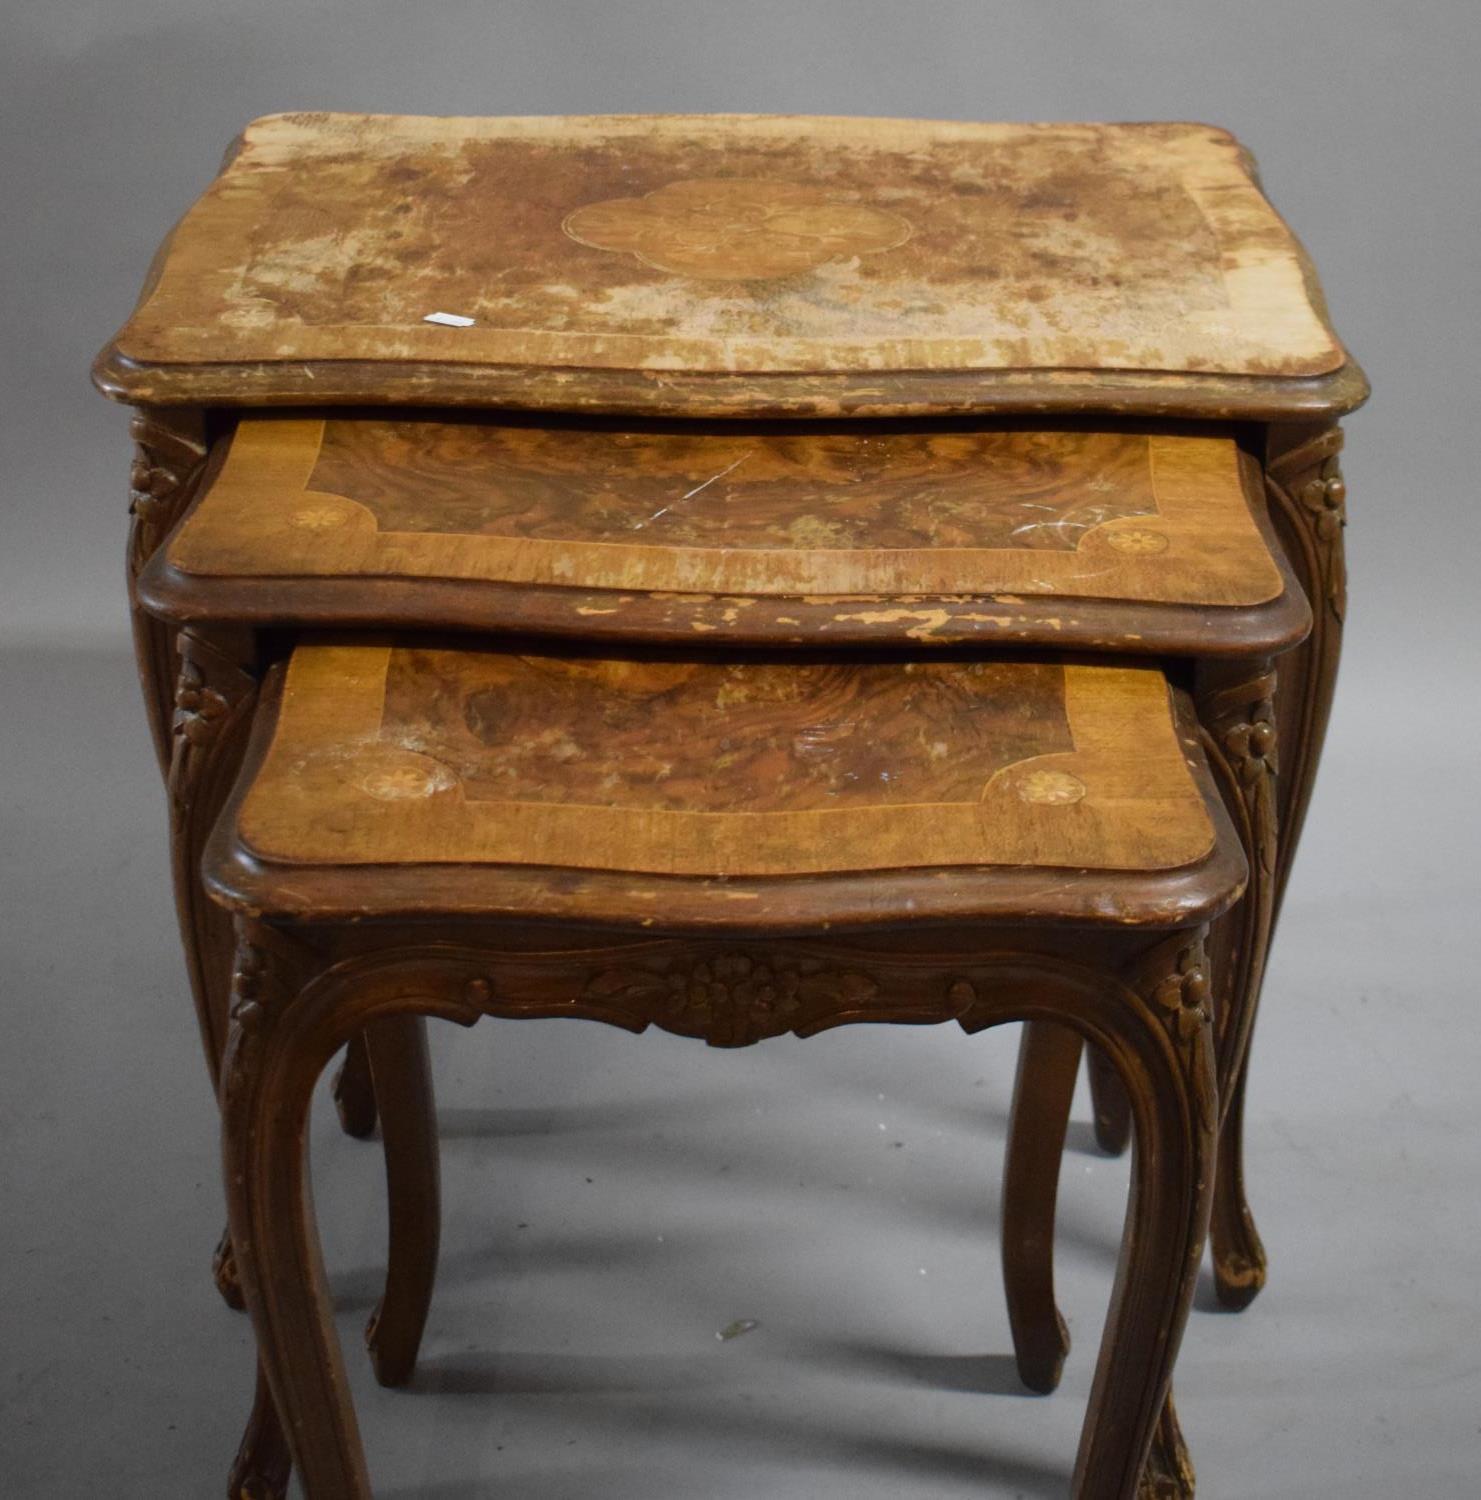 A Nest of Three Crossbanded Inlaid Burr Walnut Tables by Hale and Epstein, badly water stained and - Image 2 of 2